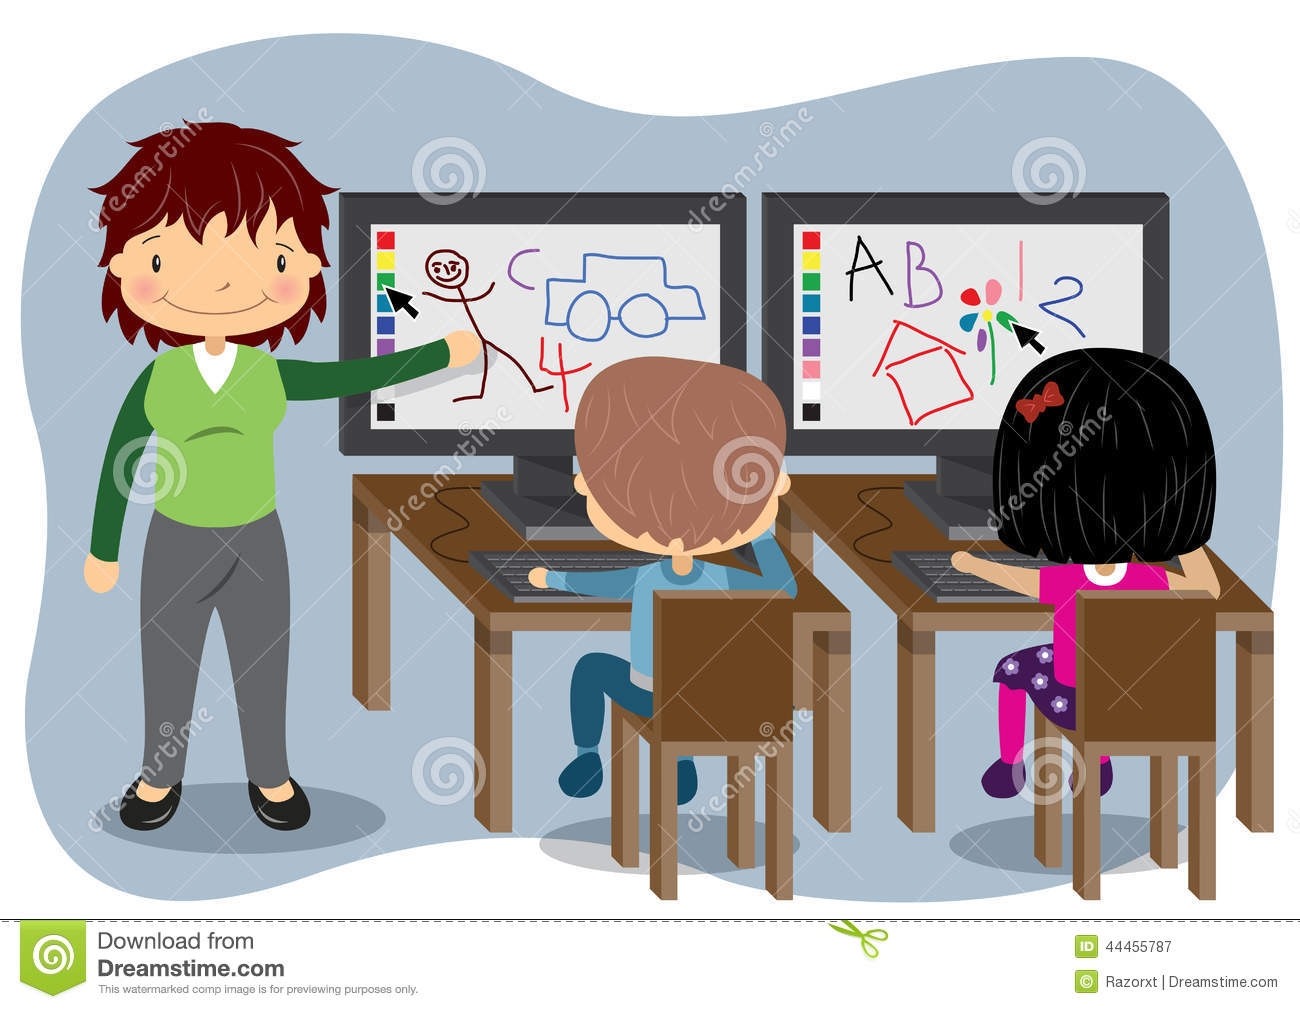 uses of computer in school clipart playing